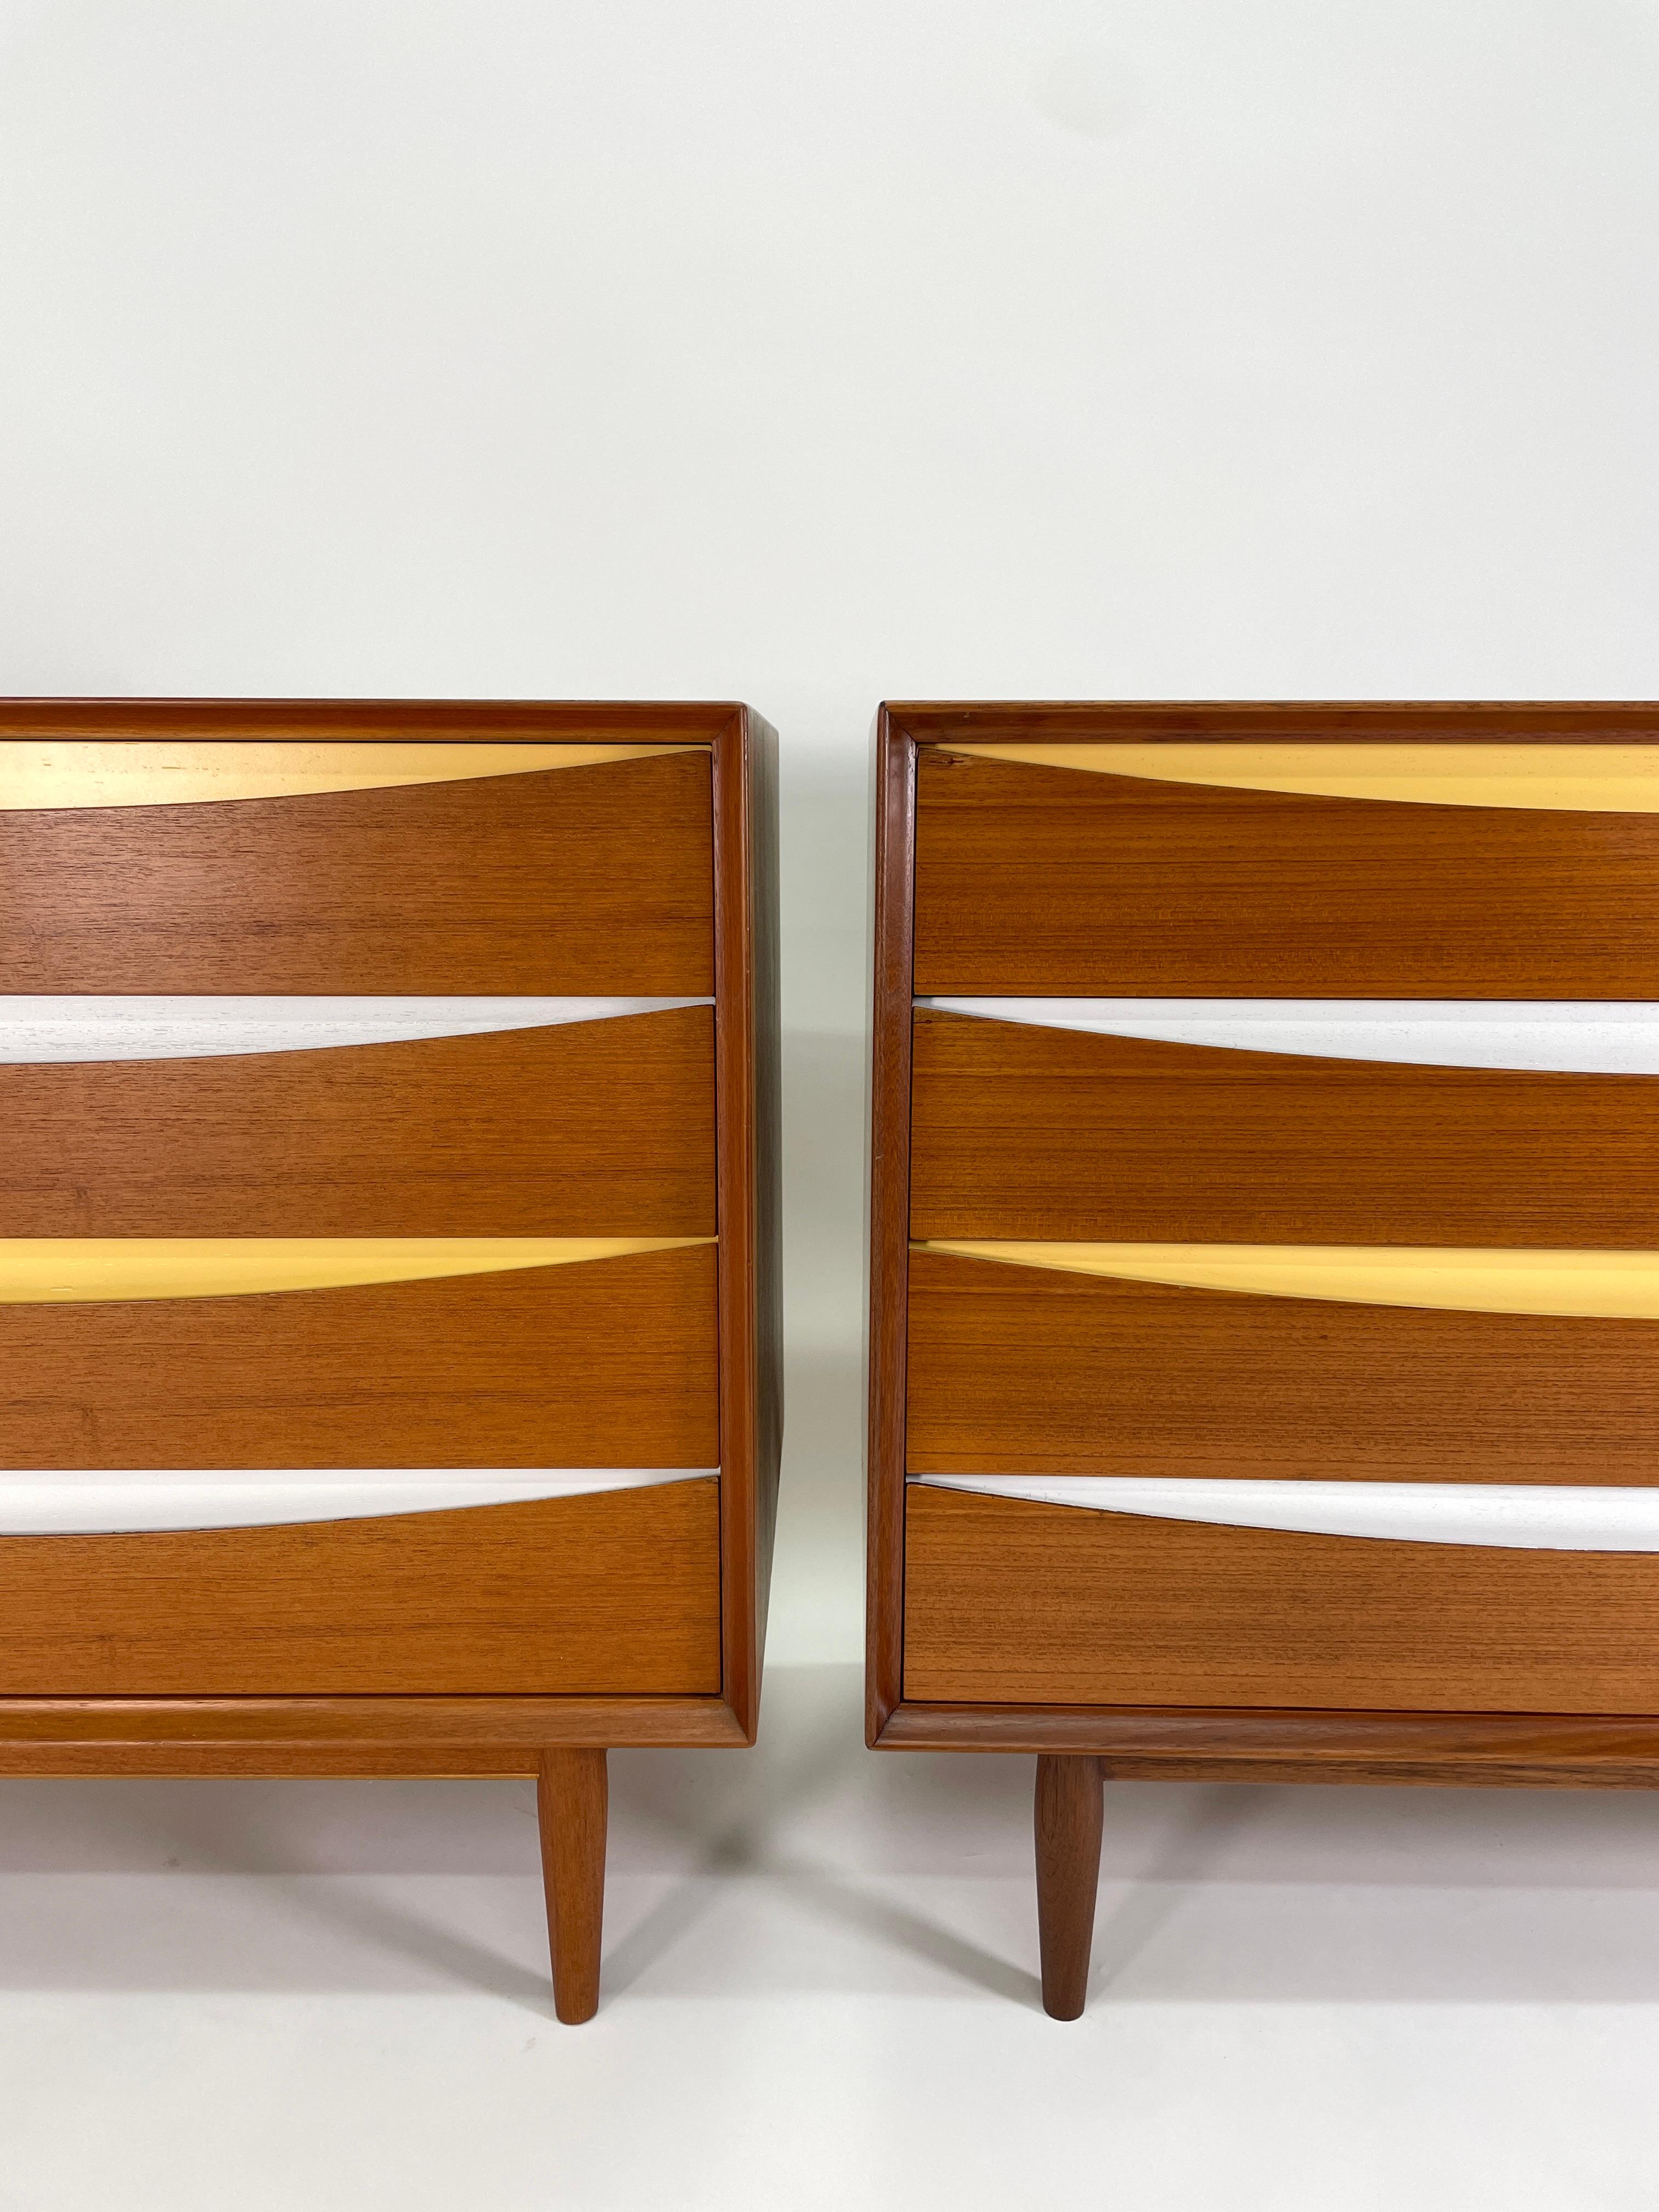 An iconic design by Arne Vodder Triennale 4-drawer dresser was produced by Sibast Mobler, circa 1950. Constructed in teak, the 4-drawer dresser is a classic piece of Danish Modern furniture. The drawers are alternating yellow and white. The drawer